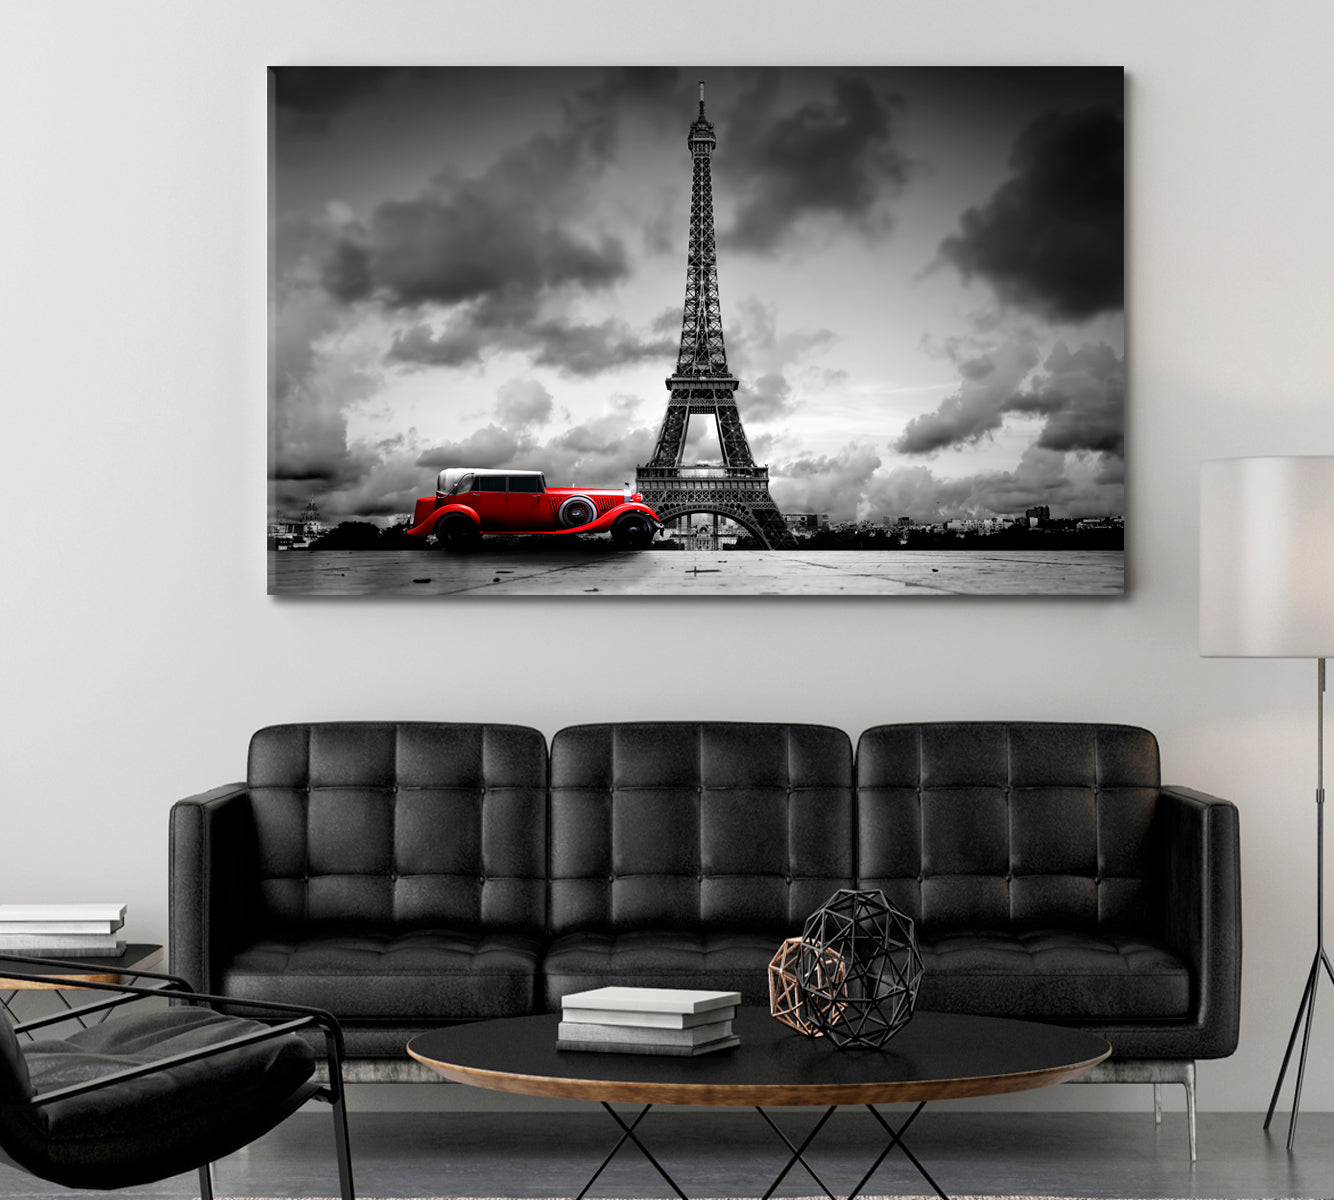 Eiffel Tower Paris France Red Retro Car Black and White Vintage Artistic Black and White Wall Art Print Artesty 1 panel 24" x 16" 